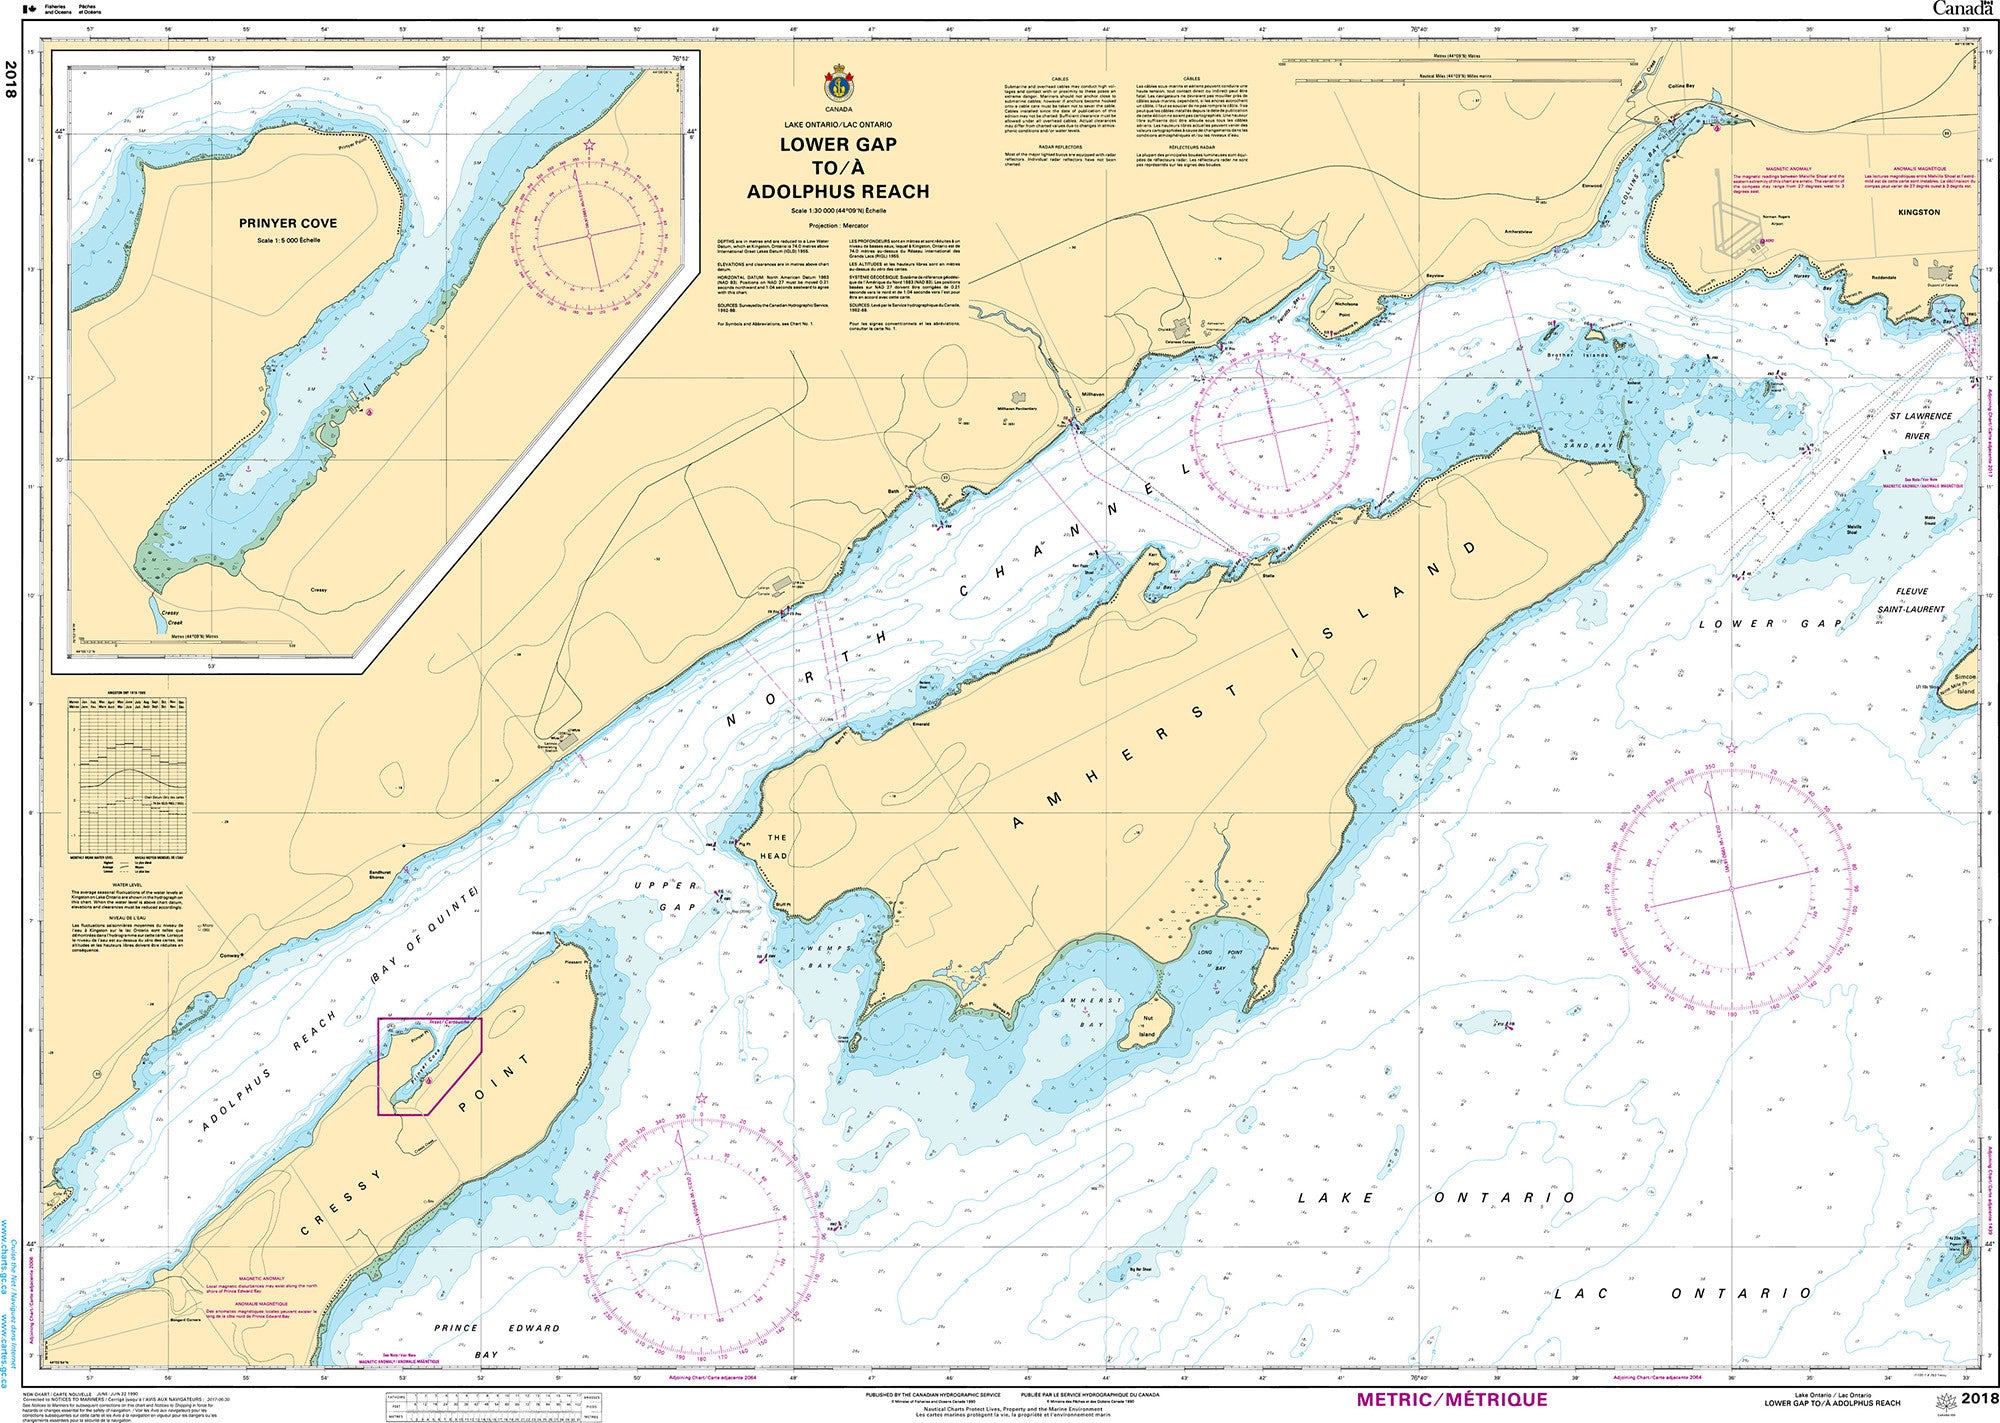 Canadian Hydrographic Service Nautical Chart CHS2018: Lower Gap to/à Adolphus Reach